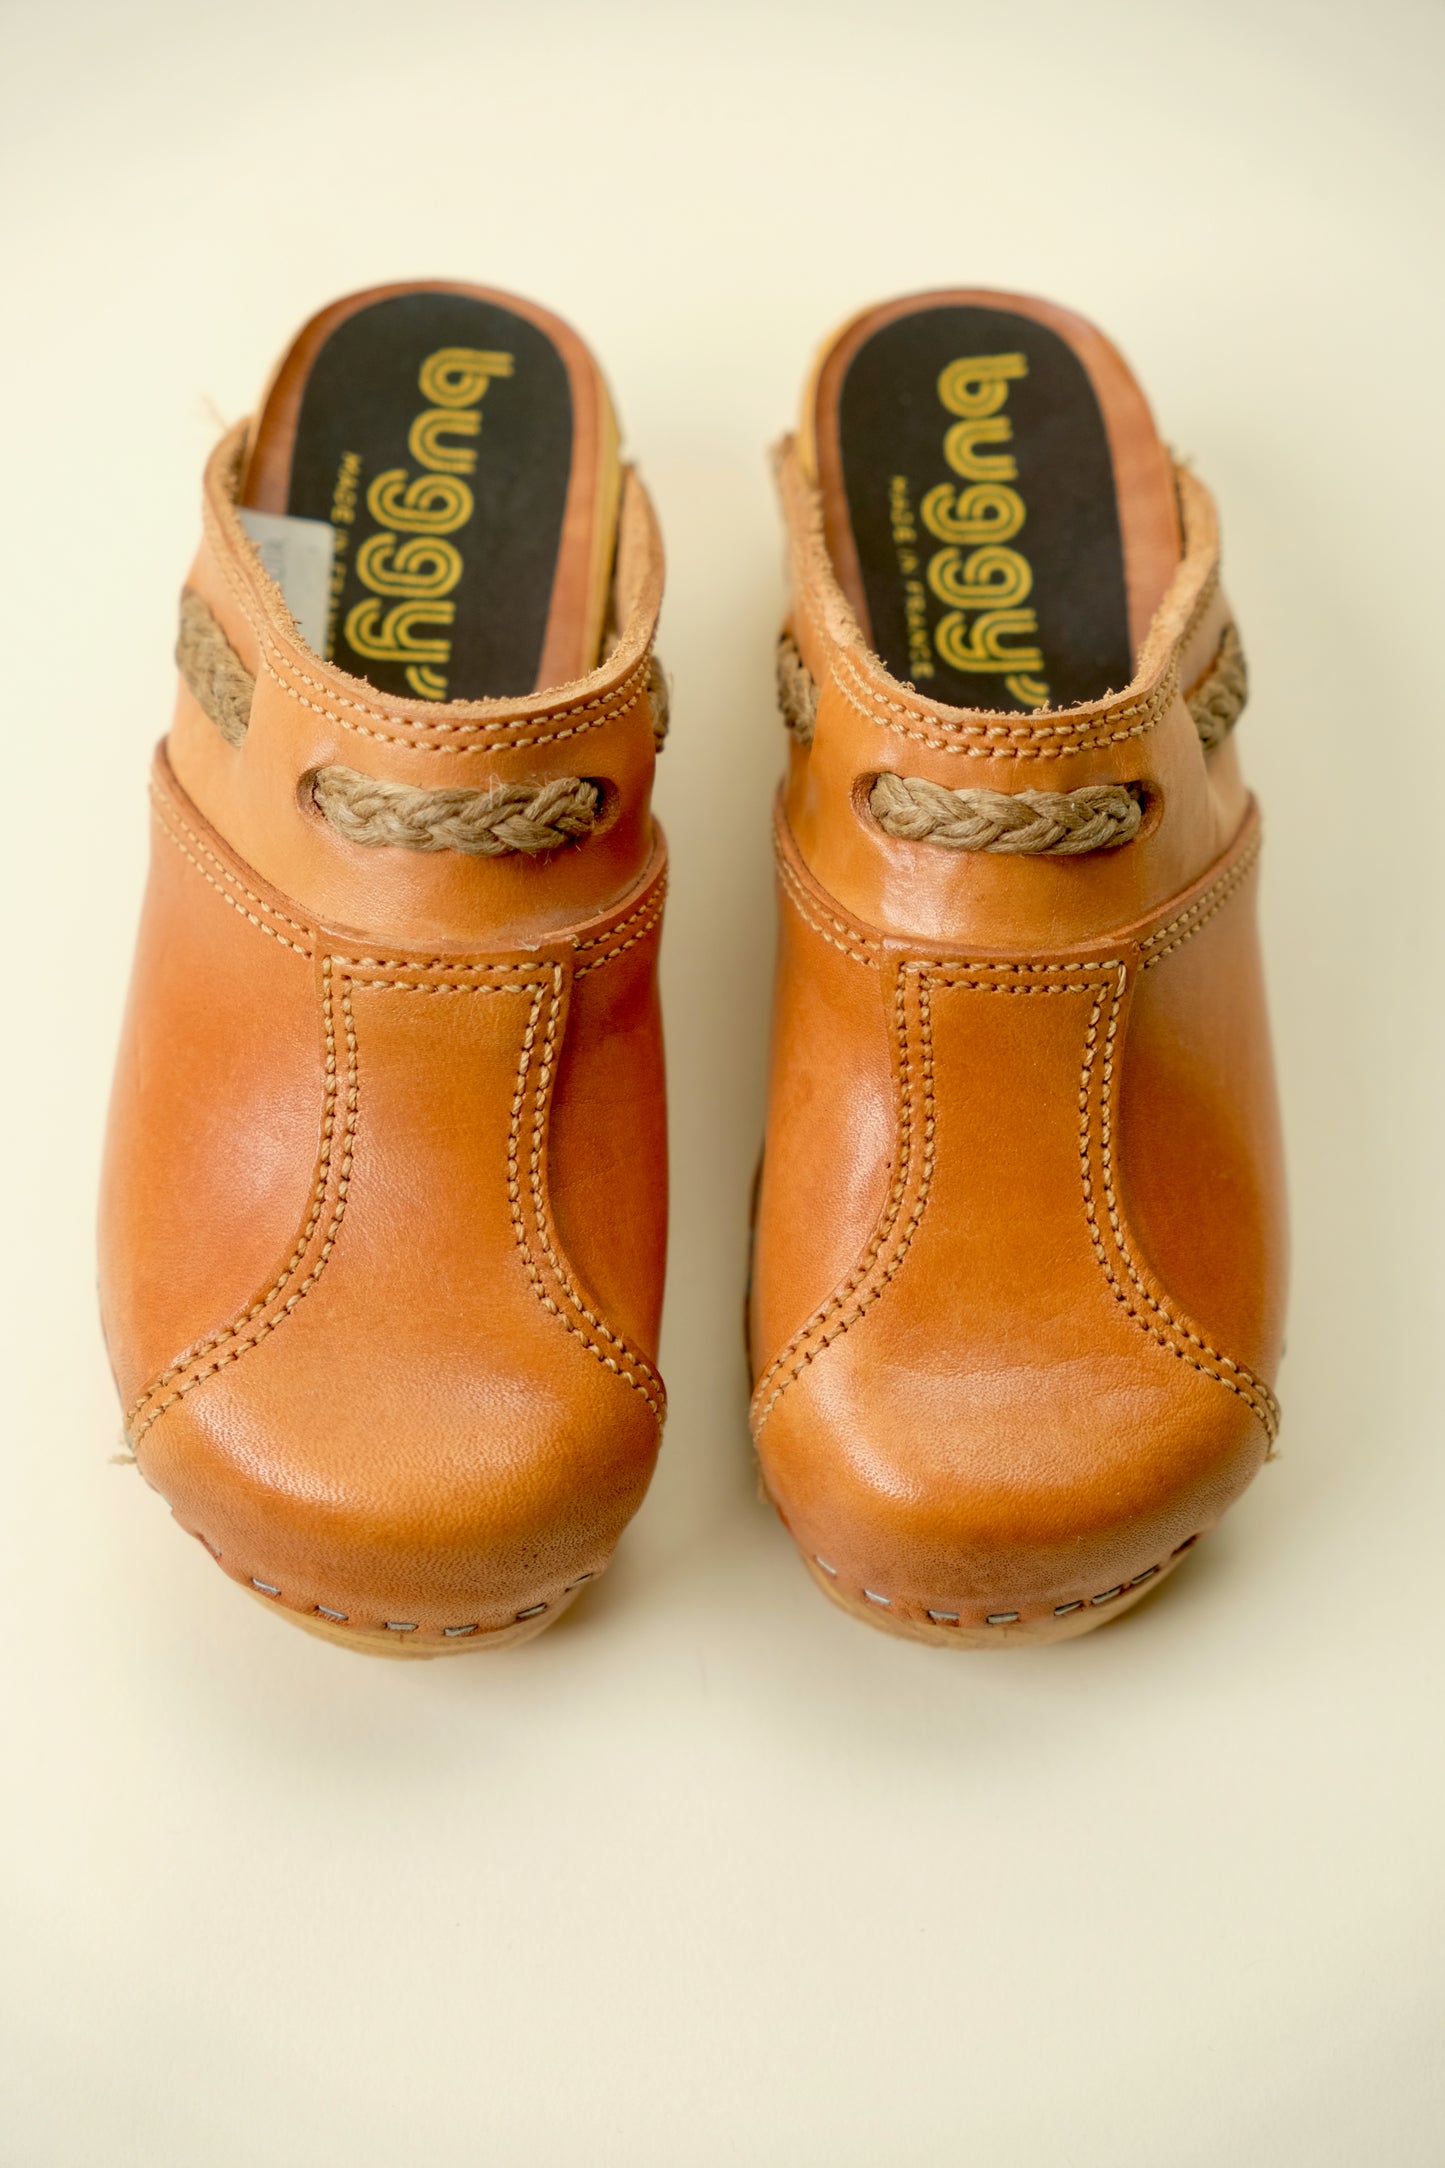 French Leather Clogs - Size 31